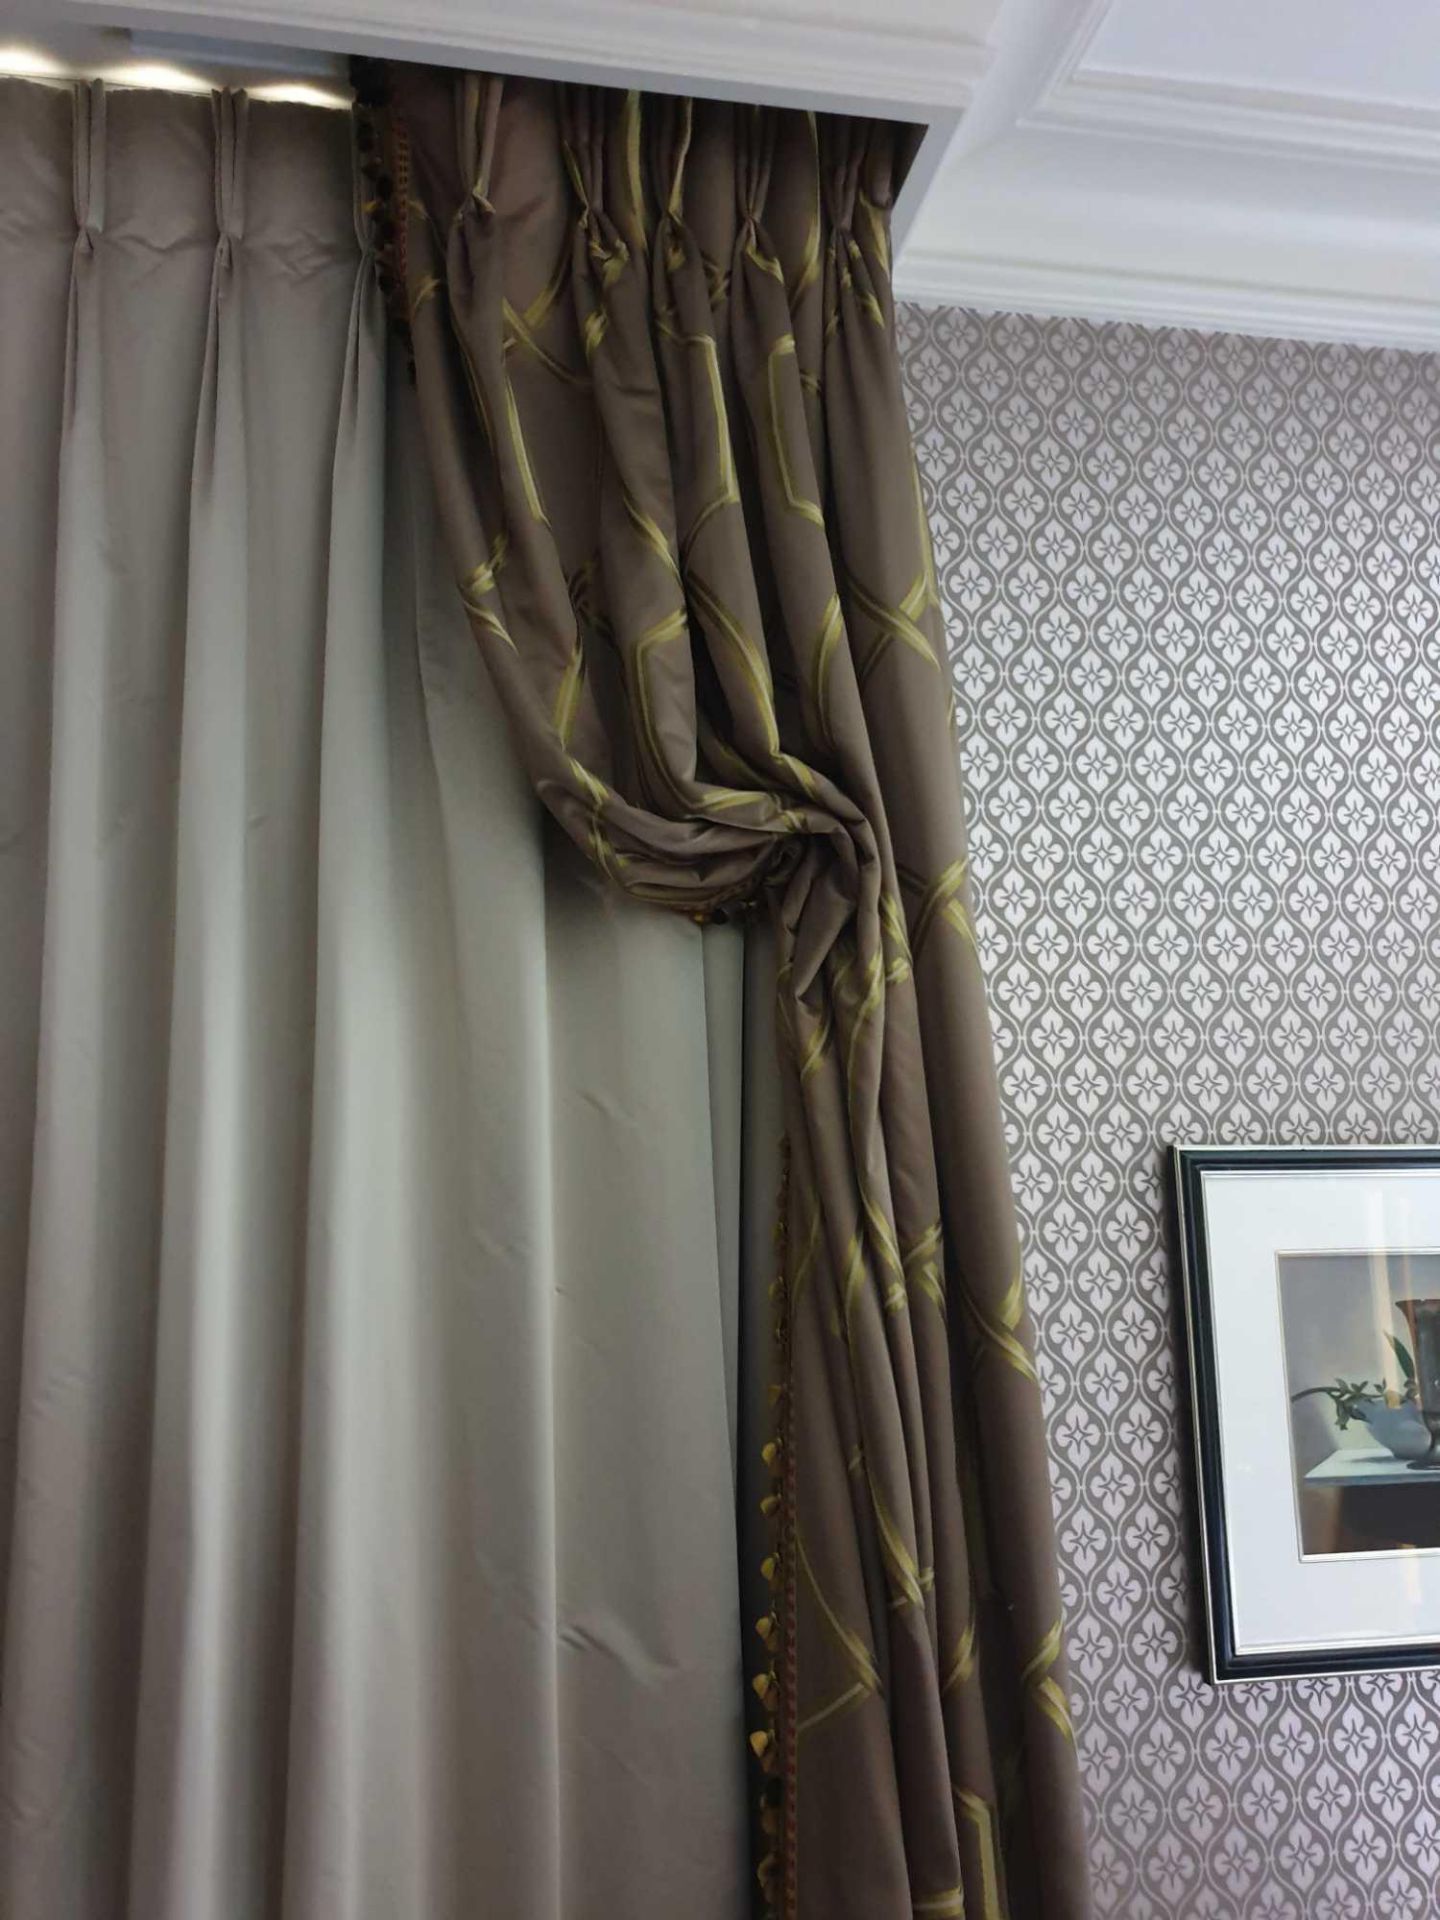 A Pair Of Silk Drapes And Jabots Dark Grey With Grey And Green Chain Style Pattern Tassel Trim And - Image 2 of 4